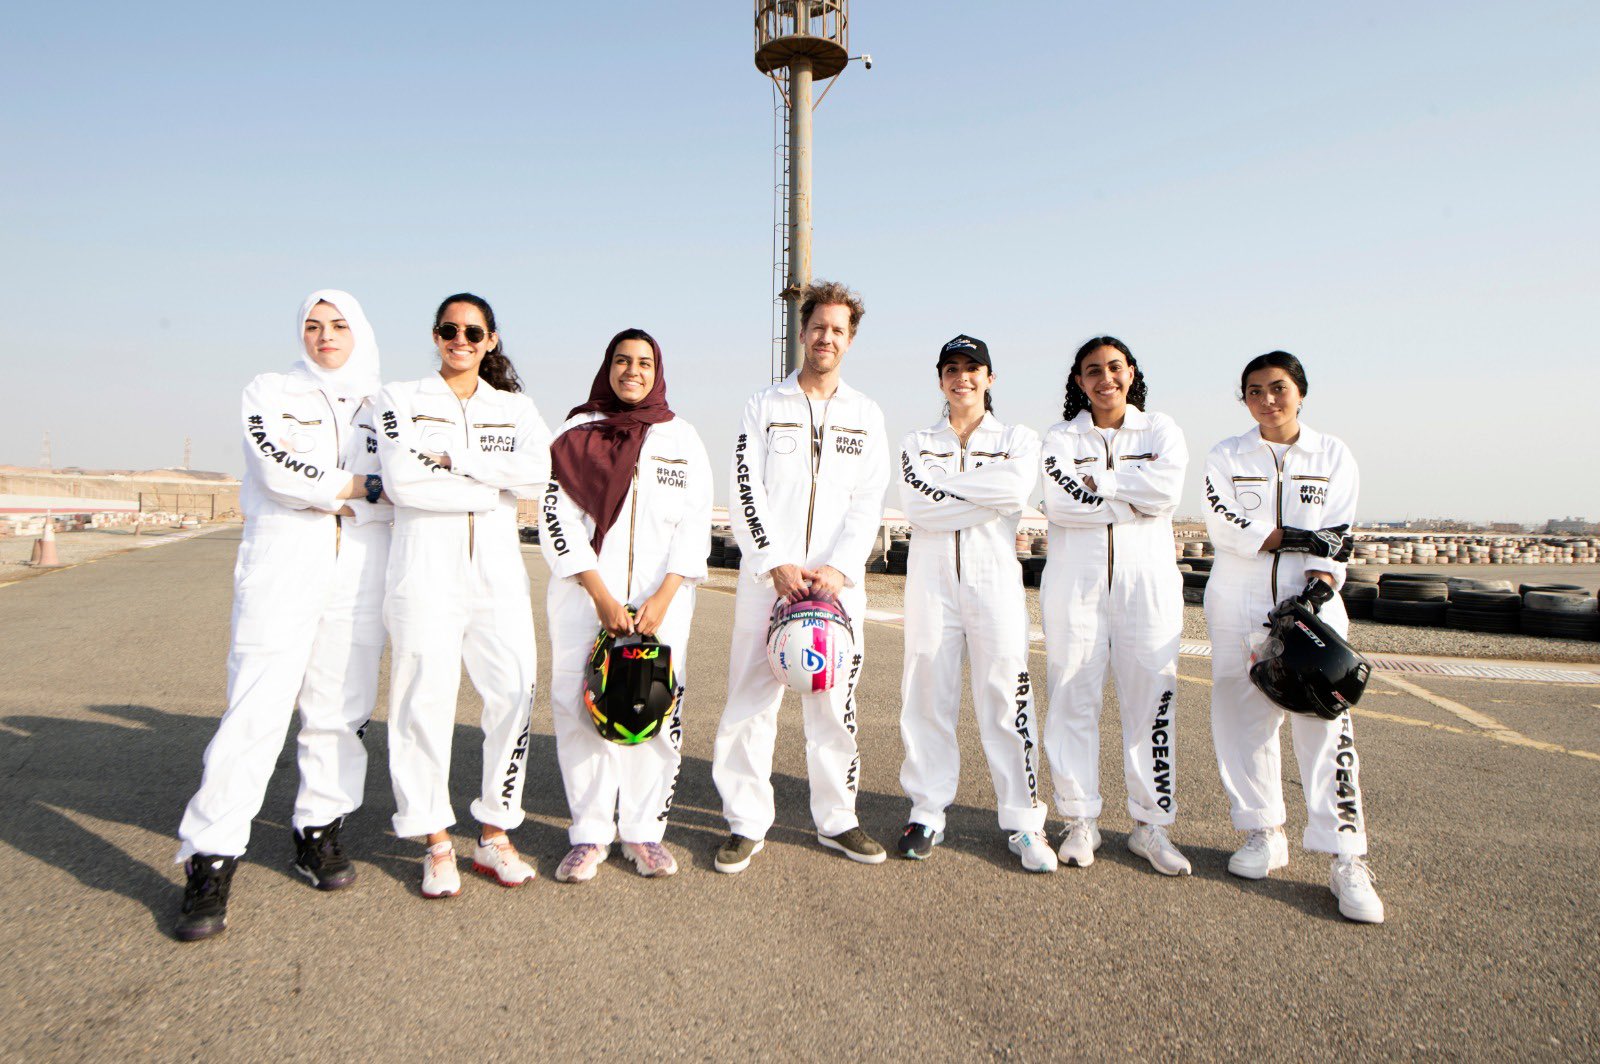 Vettel holds a karting event exclusive to females in Saudi Arabia